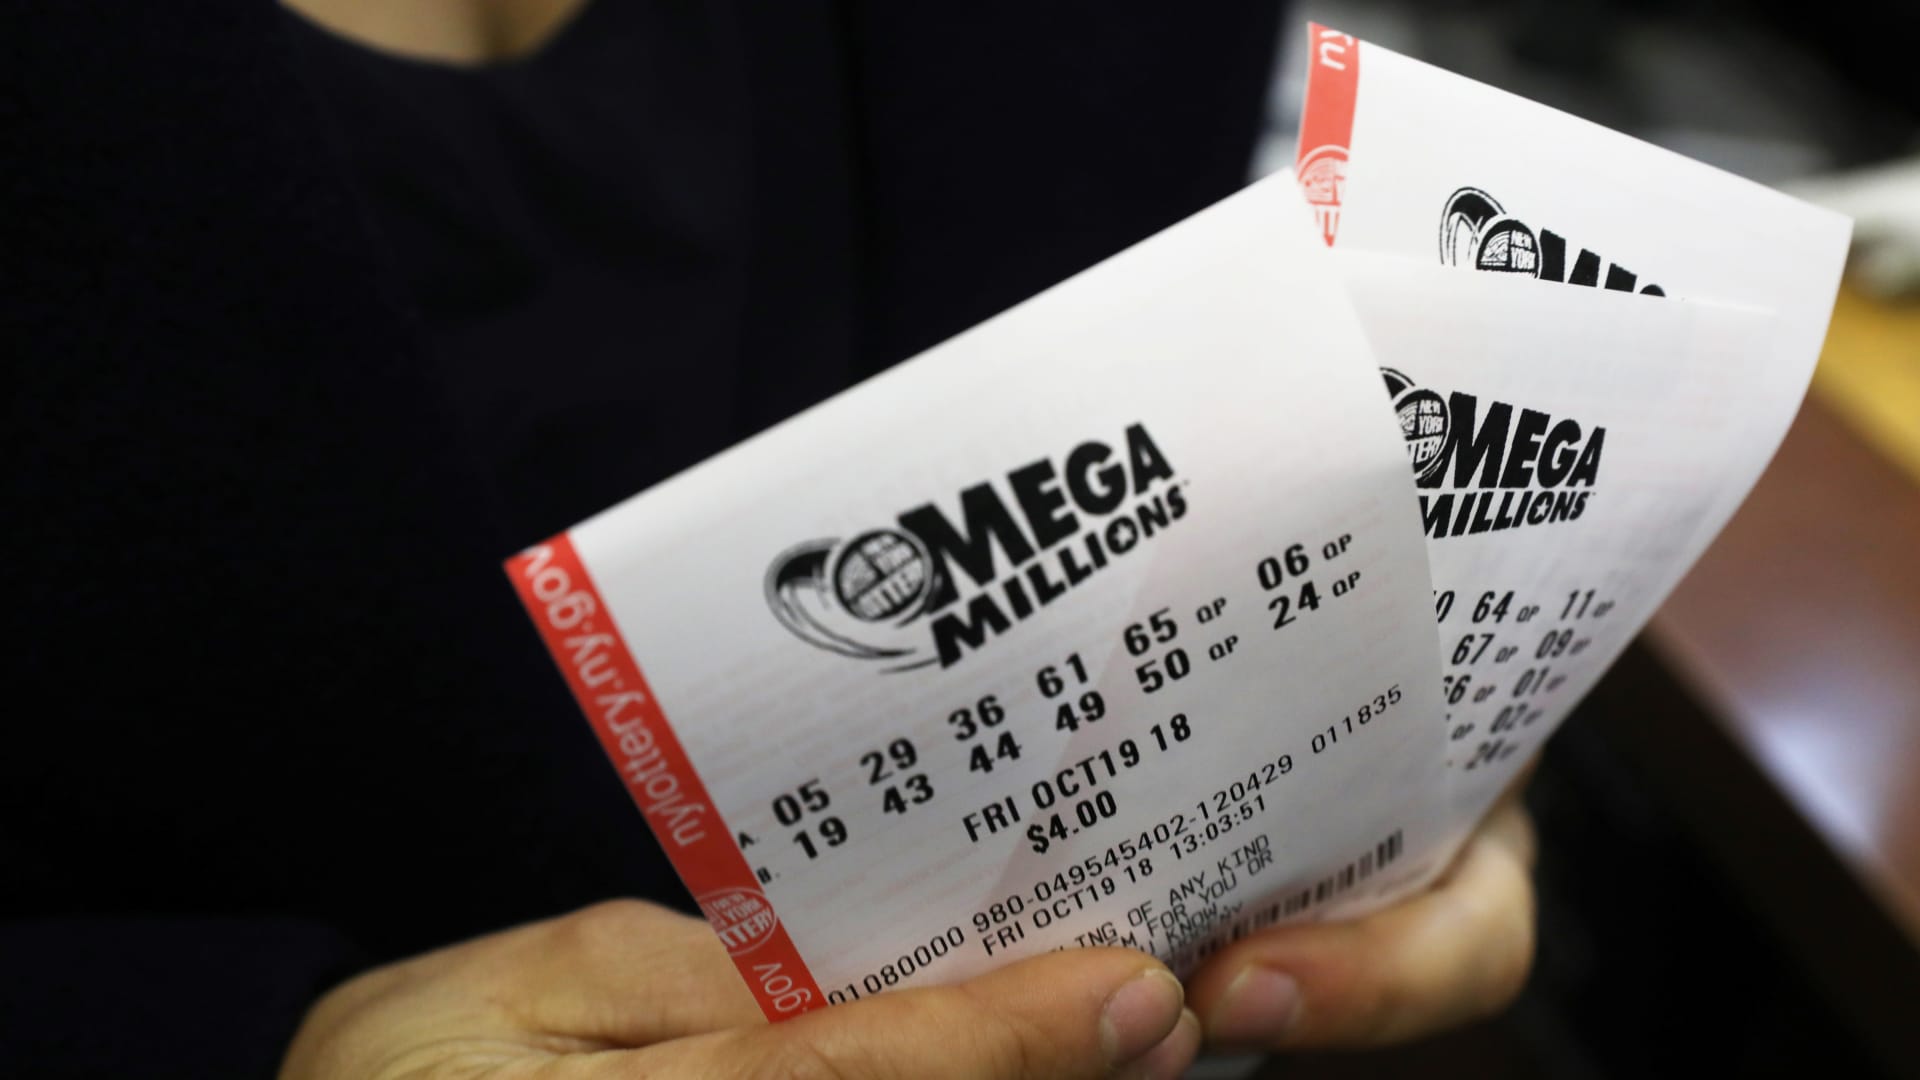 If you win the $314 million Mega Millions jackpot, here's what to do first to protect your windfall